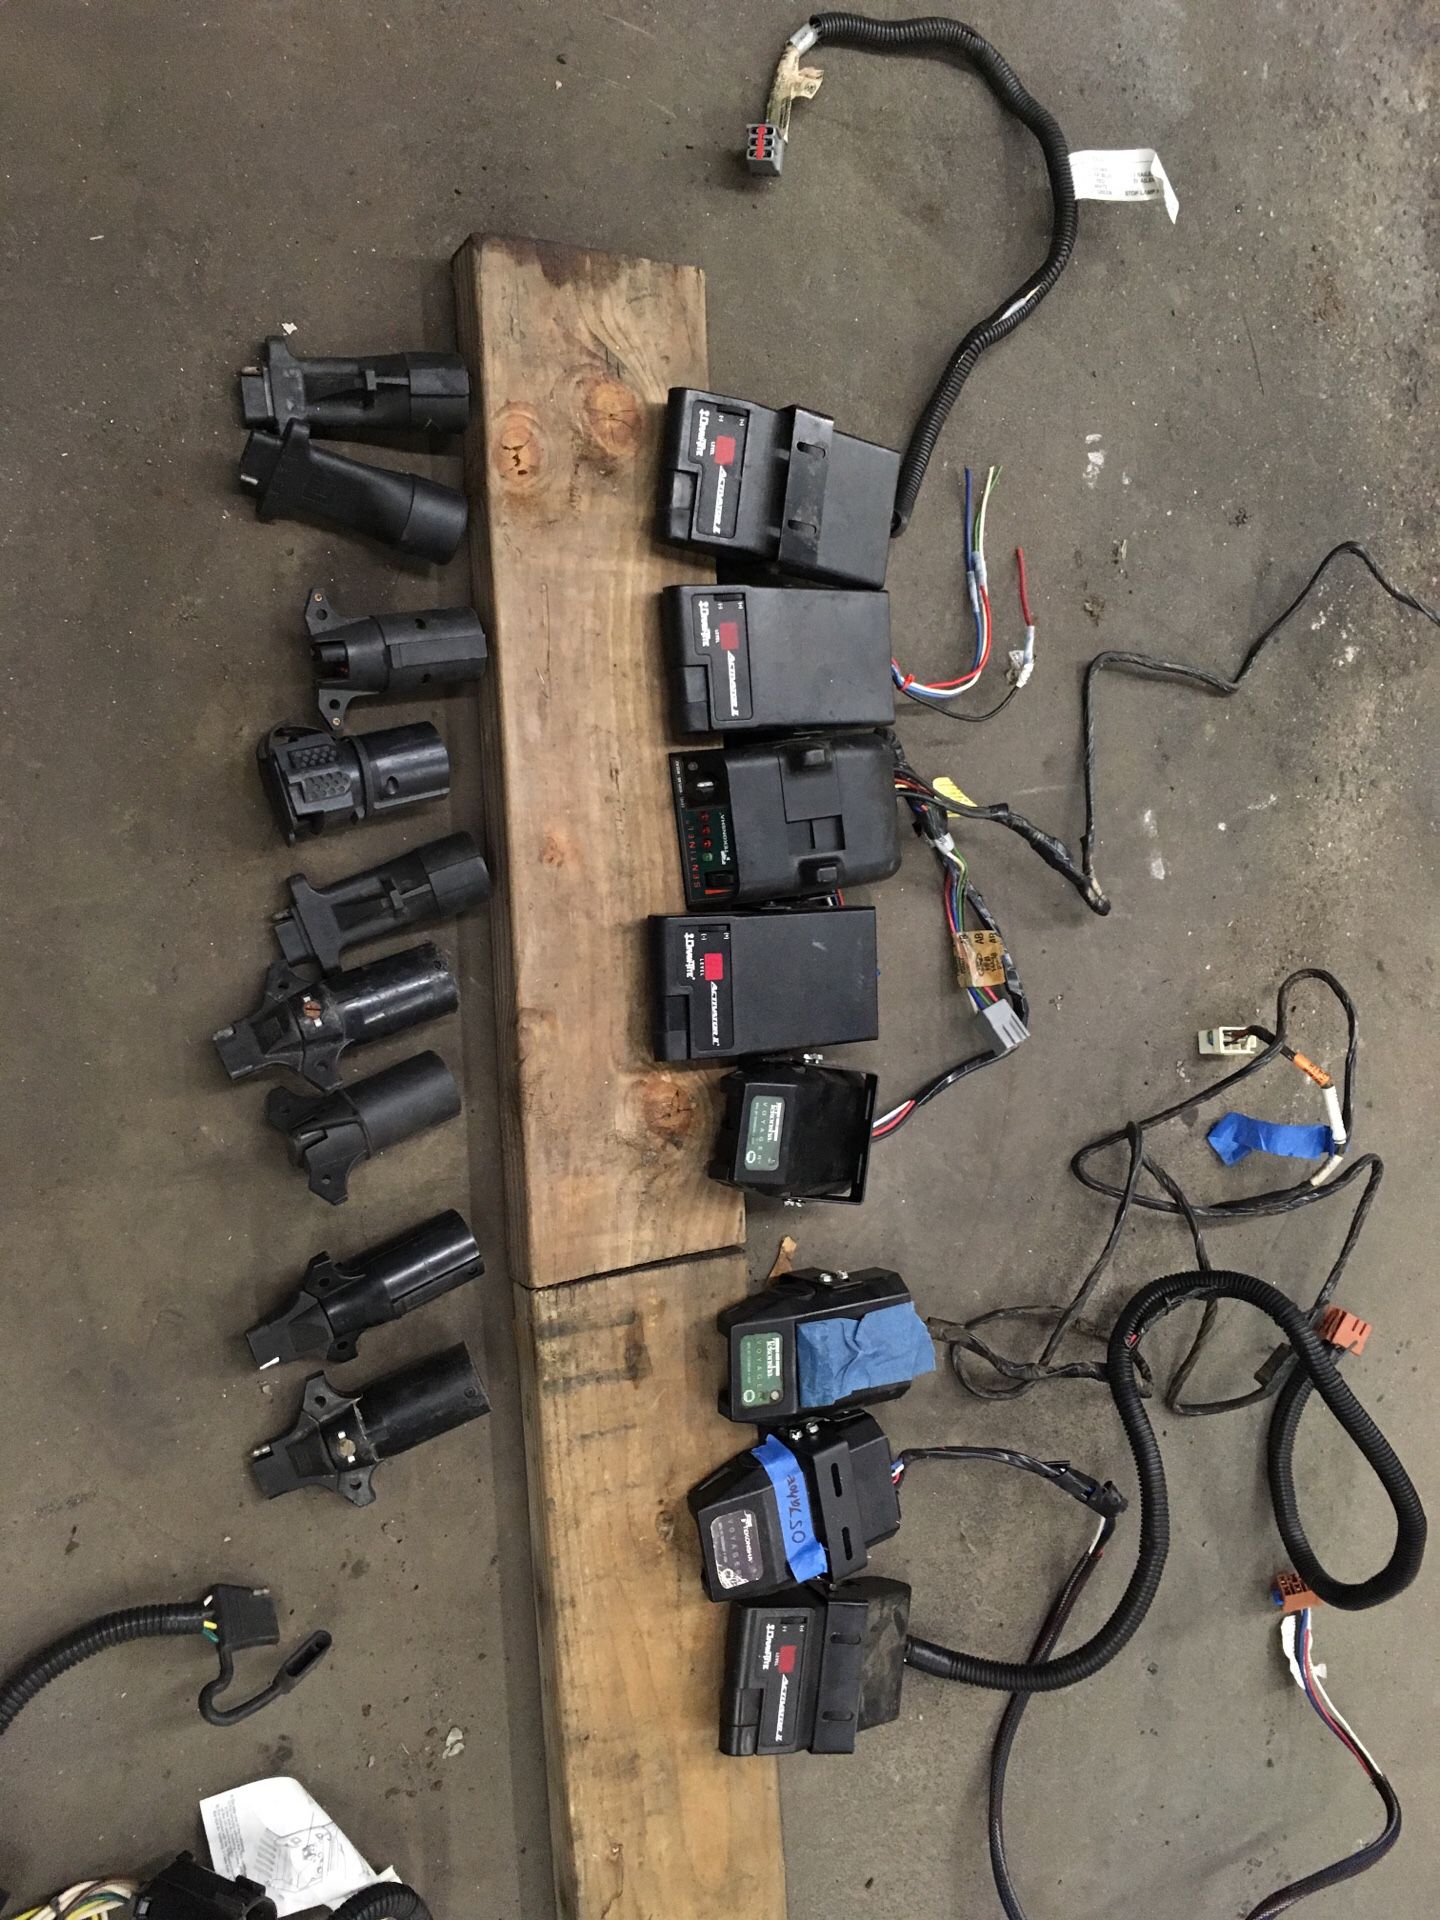 Trailer brake controllers and trailer plugs for trailer and Harnesses for the controllers